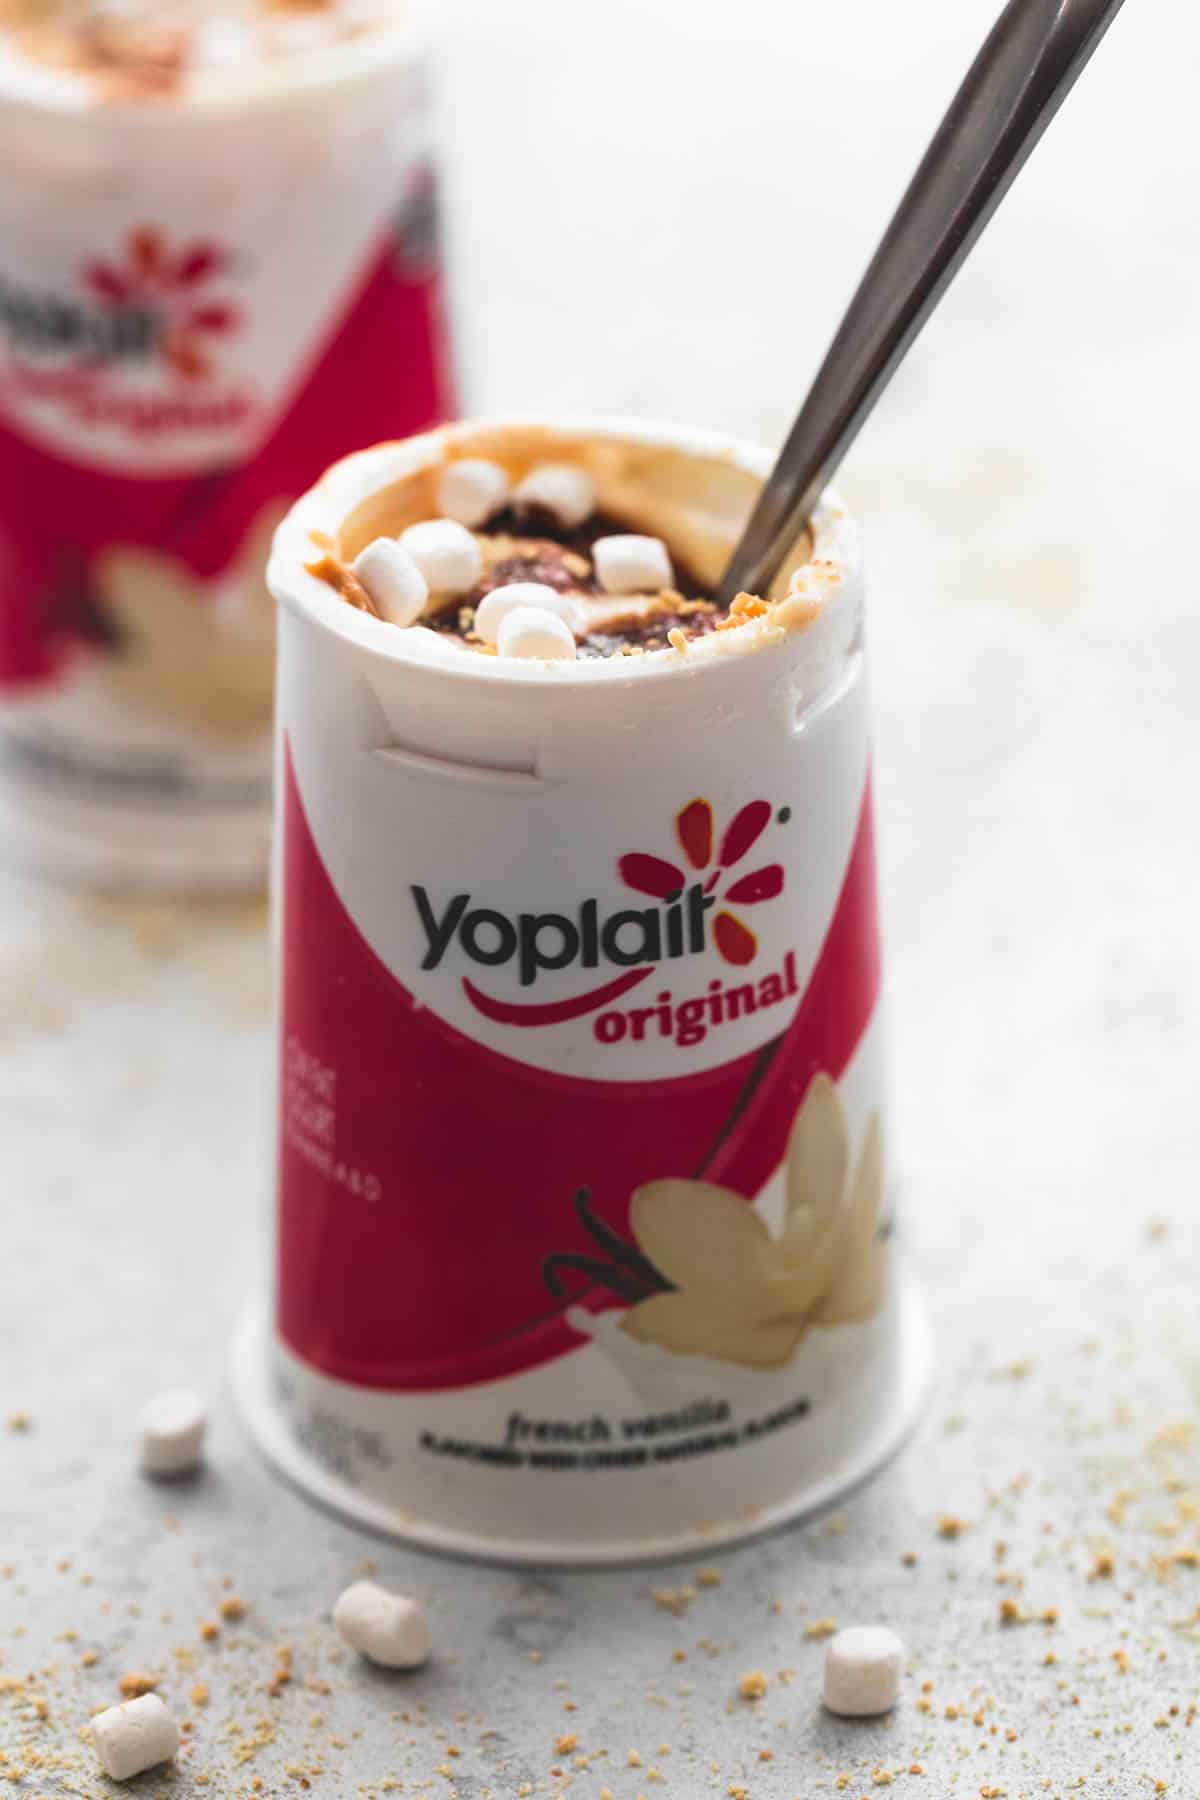 peanut butter s'mores yogurt with a spoon in a Yoplait container with another yogurt container faded in the background.